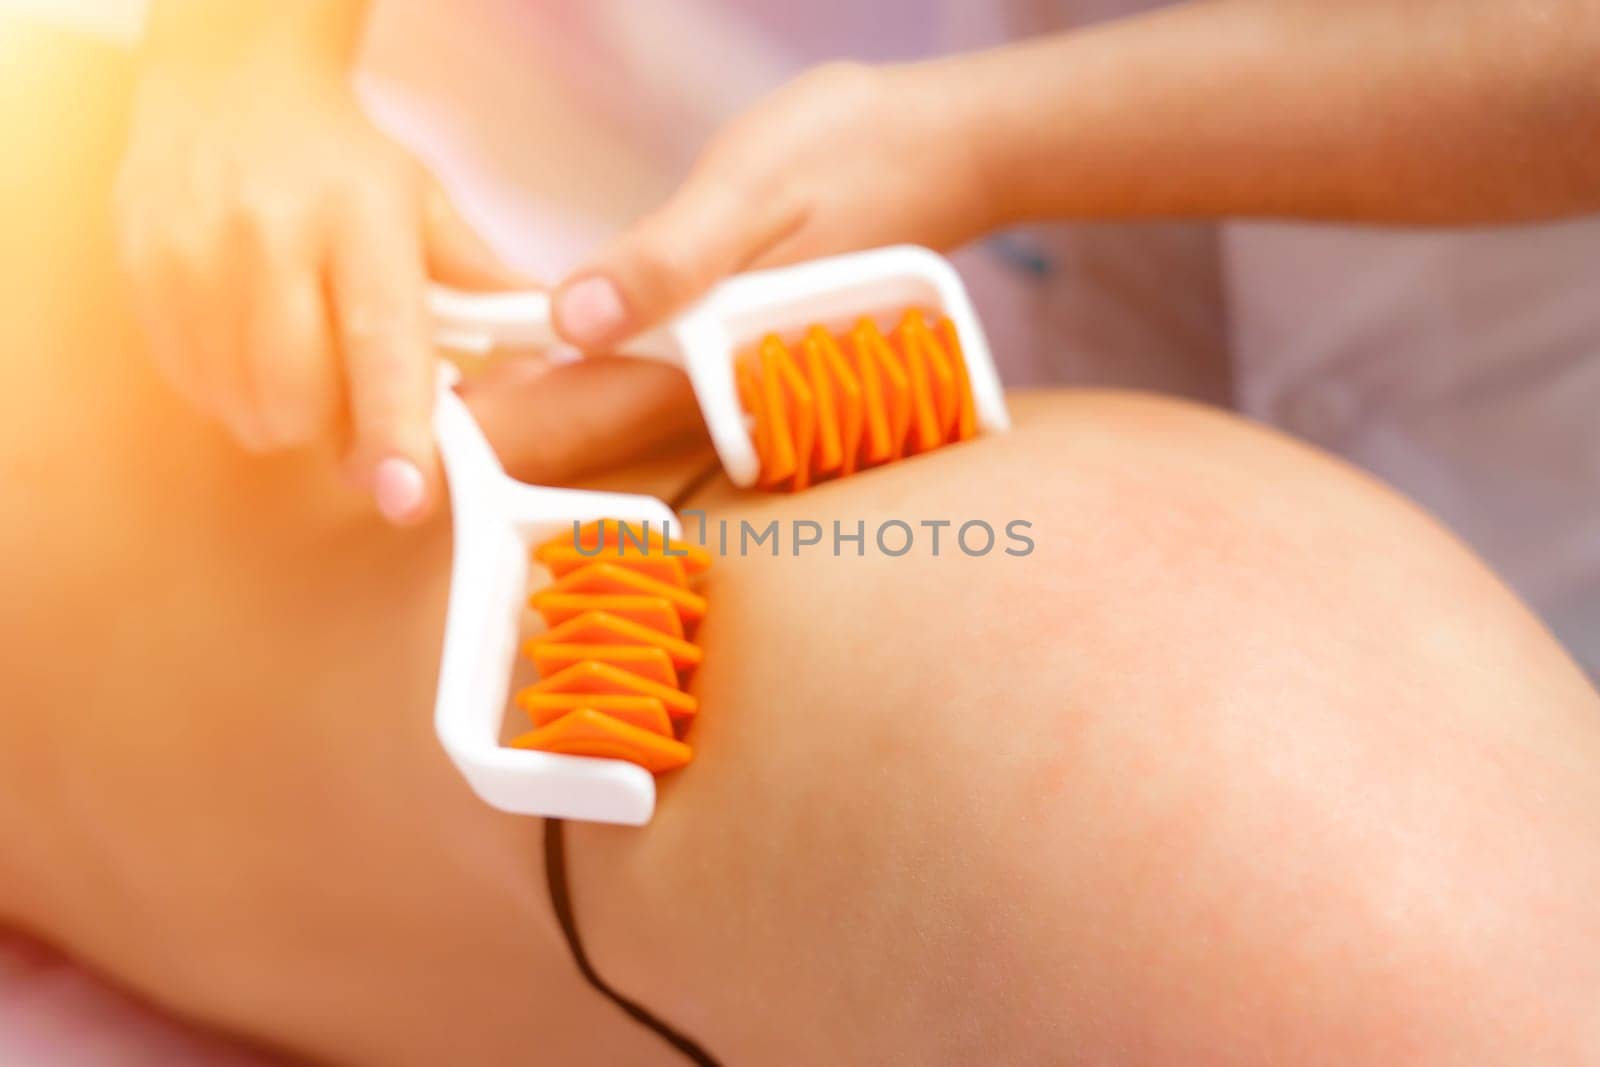 The masseur makes anti-cellulite massage using a roller massager. Physiotherapy and rehabilitation treatment